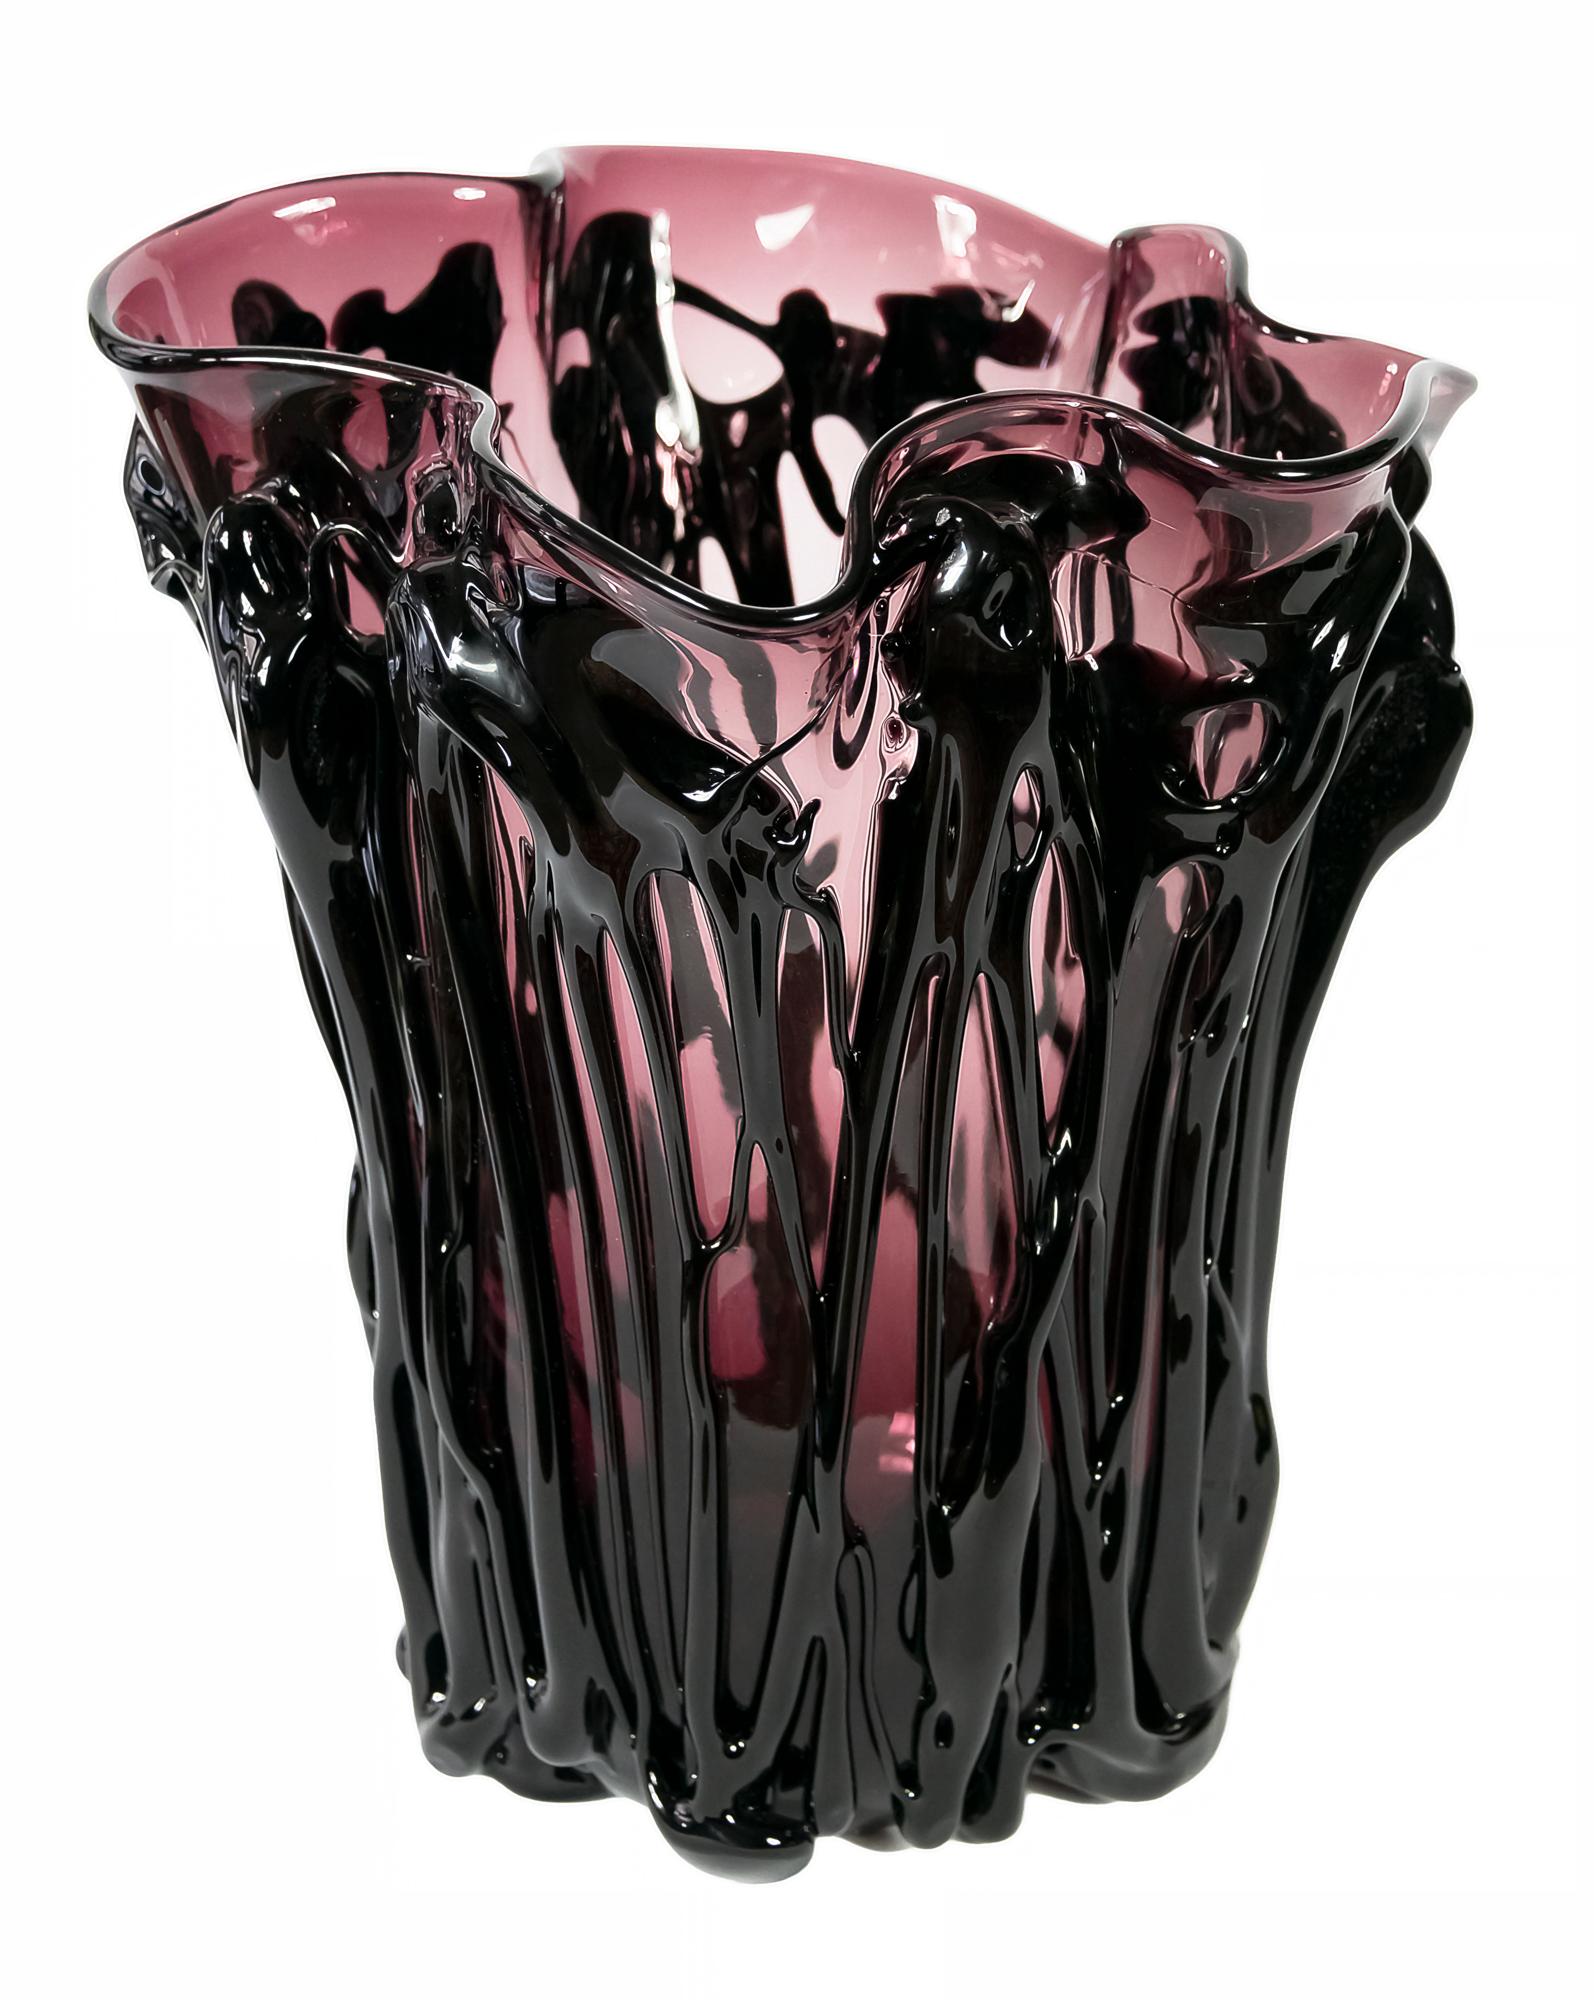 Large Italian Murano glass vase is handmade by E. Camozzo and created in asymmetric shape in two colours - purple and black.
The vase is very heavy and solid.
Weight is 10,8 kg.
Signed on the base E. Camozzo.
 